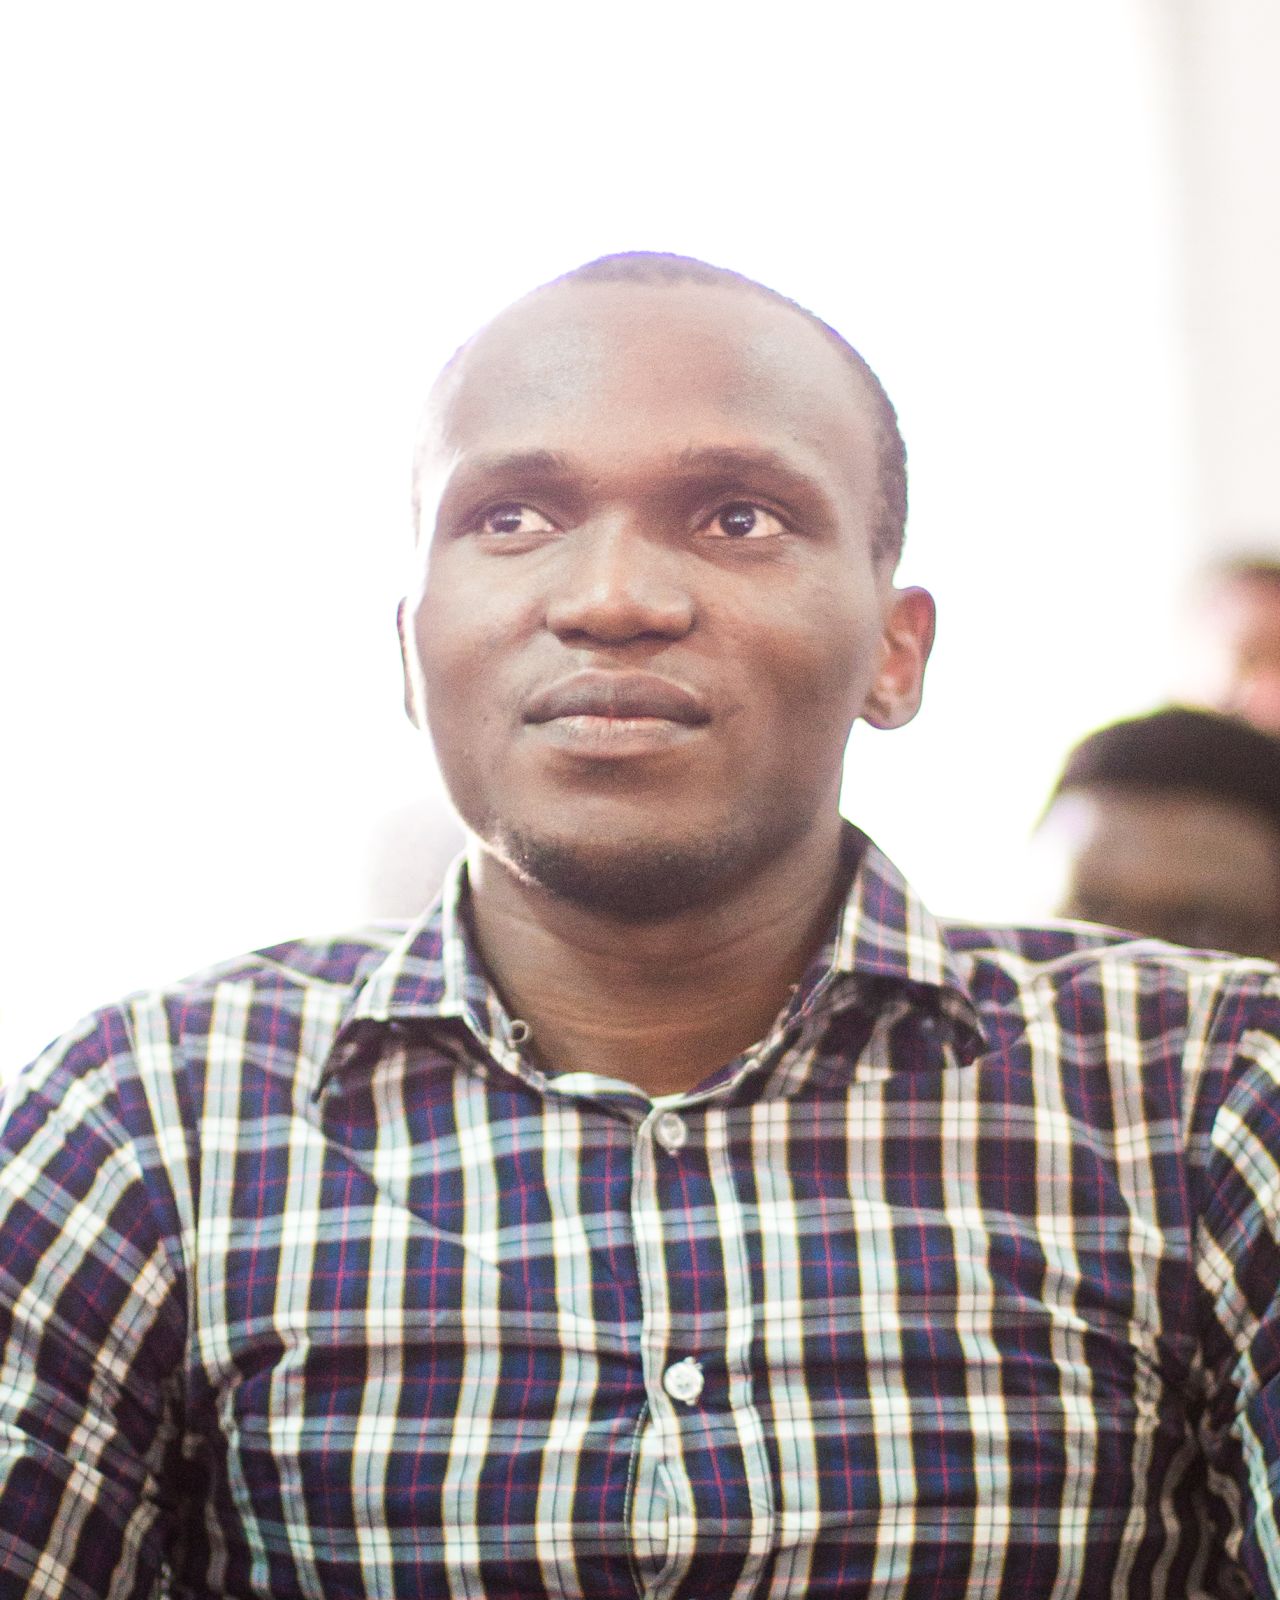 Andela is based New York and Lagos, where the recruits are trained. Many, like Johnson Ejezieove who is pictured here, move away from their hometowns for a chance to work for a global behemoth like Microsoft.